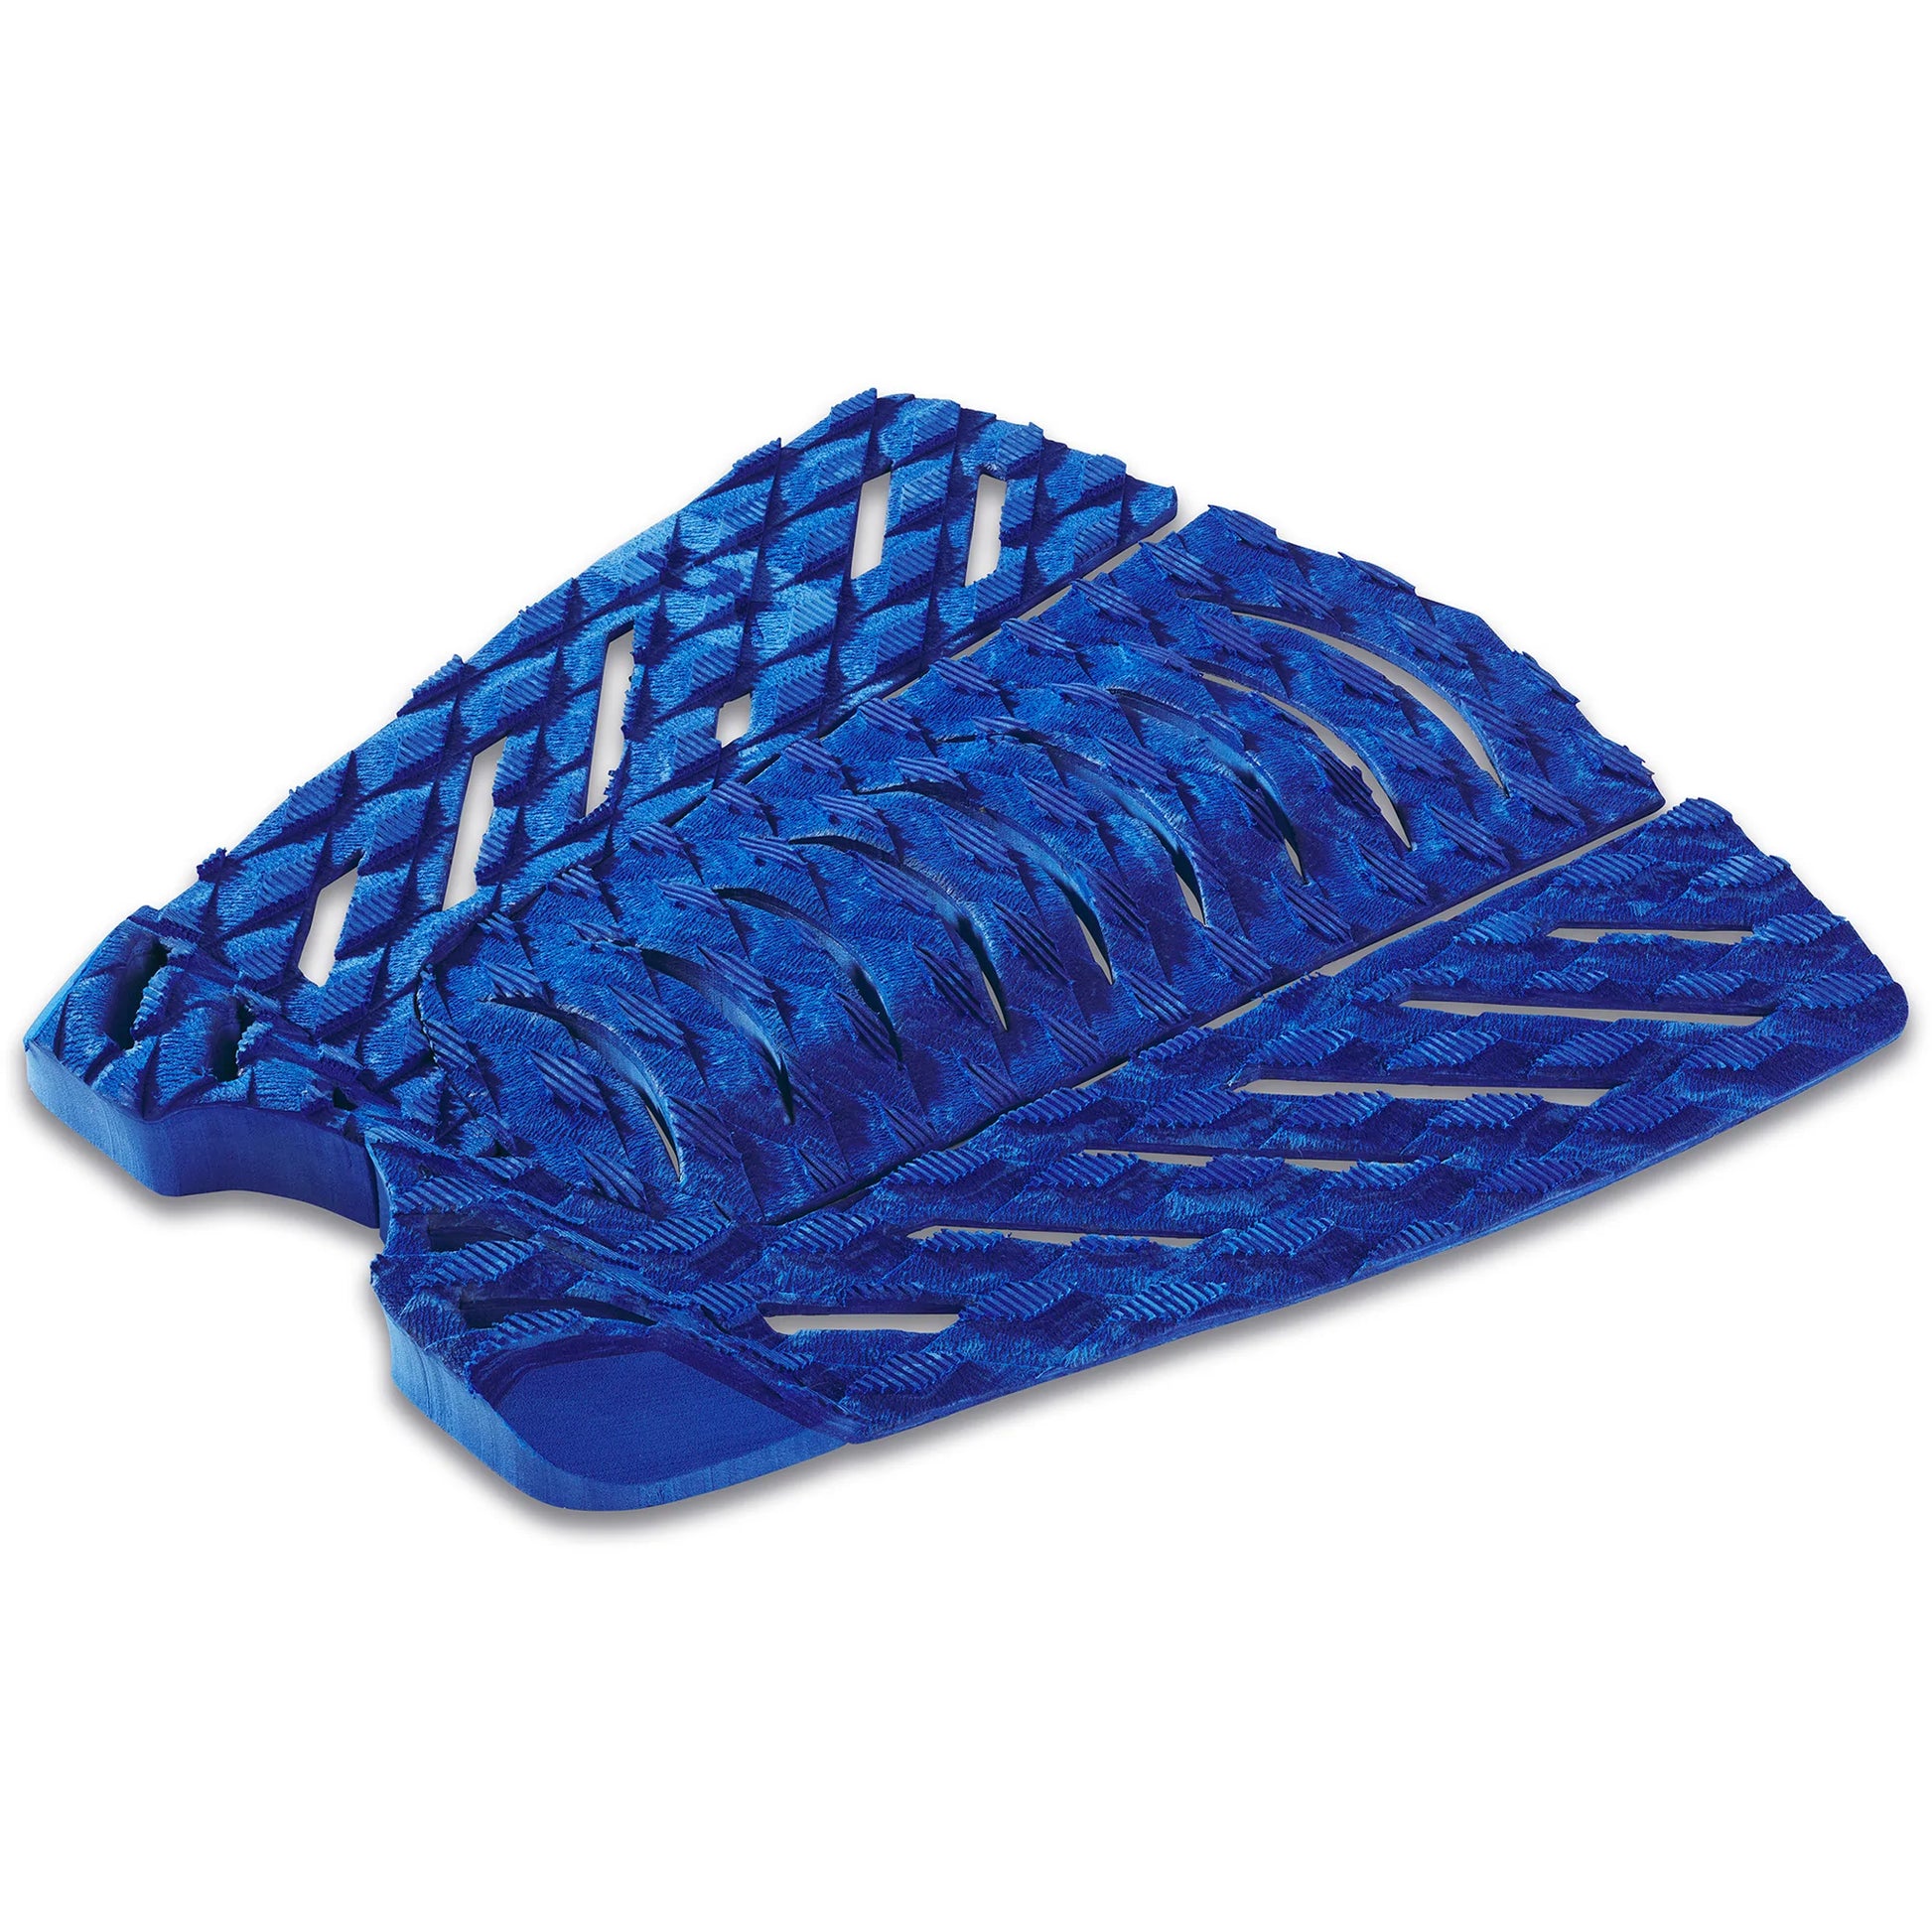 Dakine Superlite Surf Traction Pad - colors Traction Pad